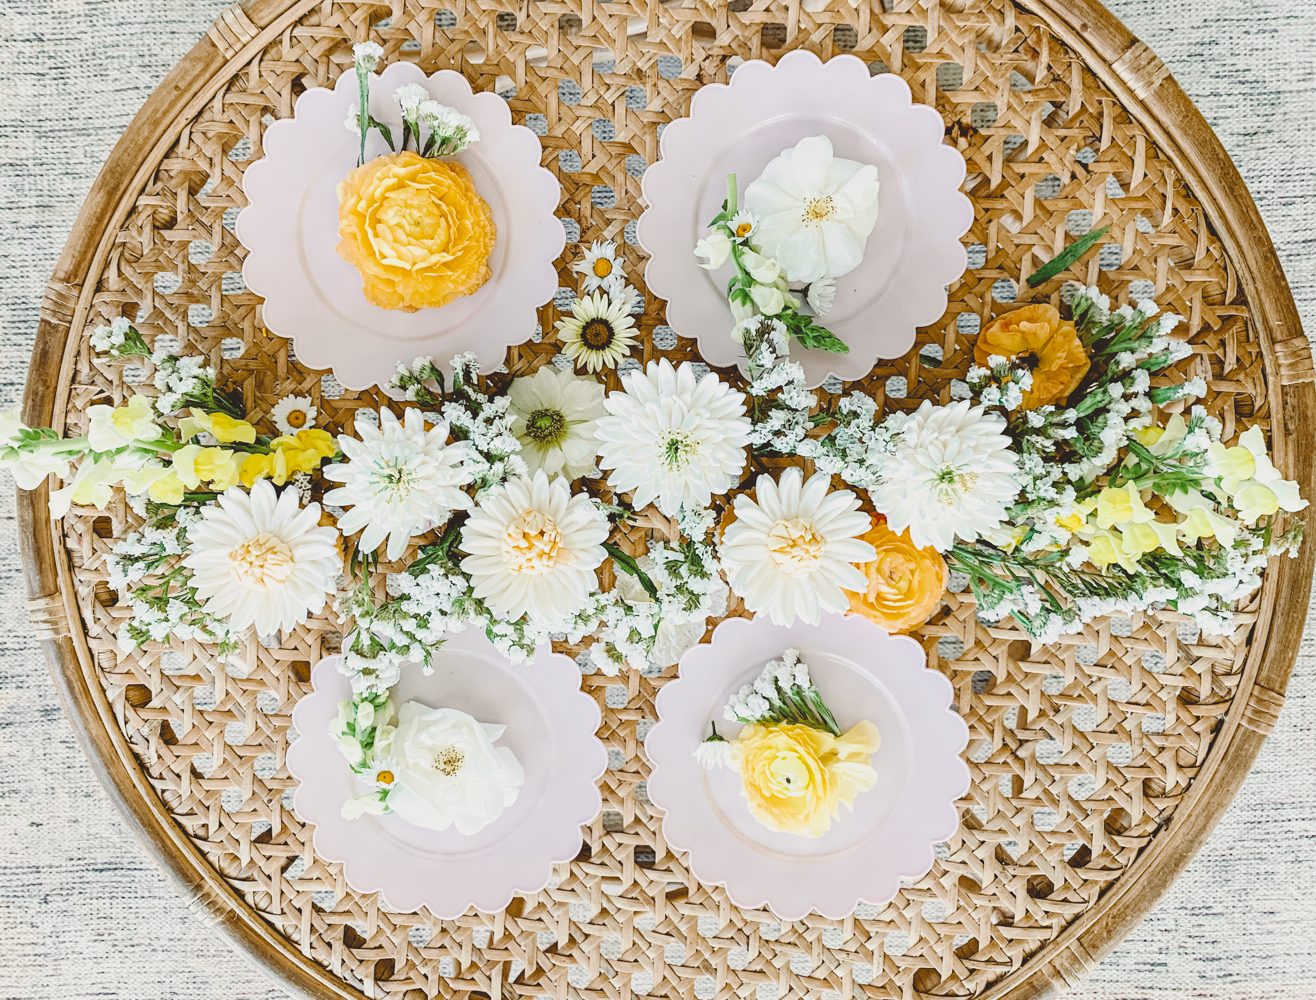 Daisy Cupcakes To Dress Up A Spring Table